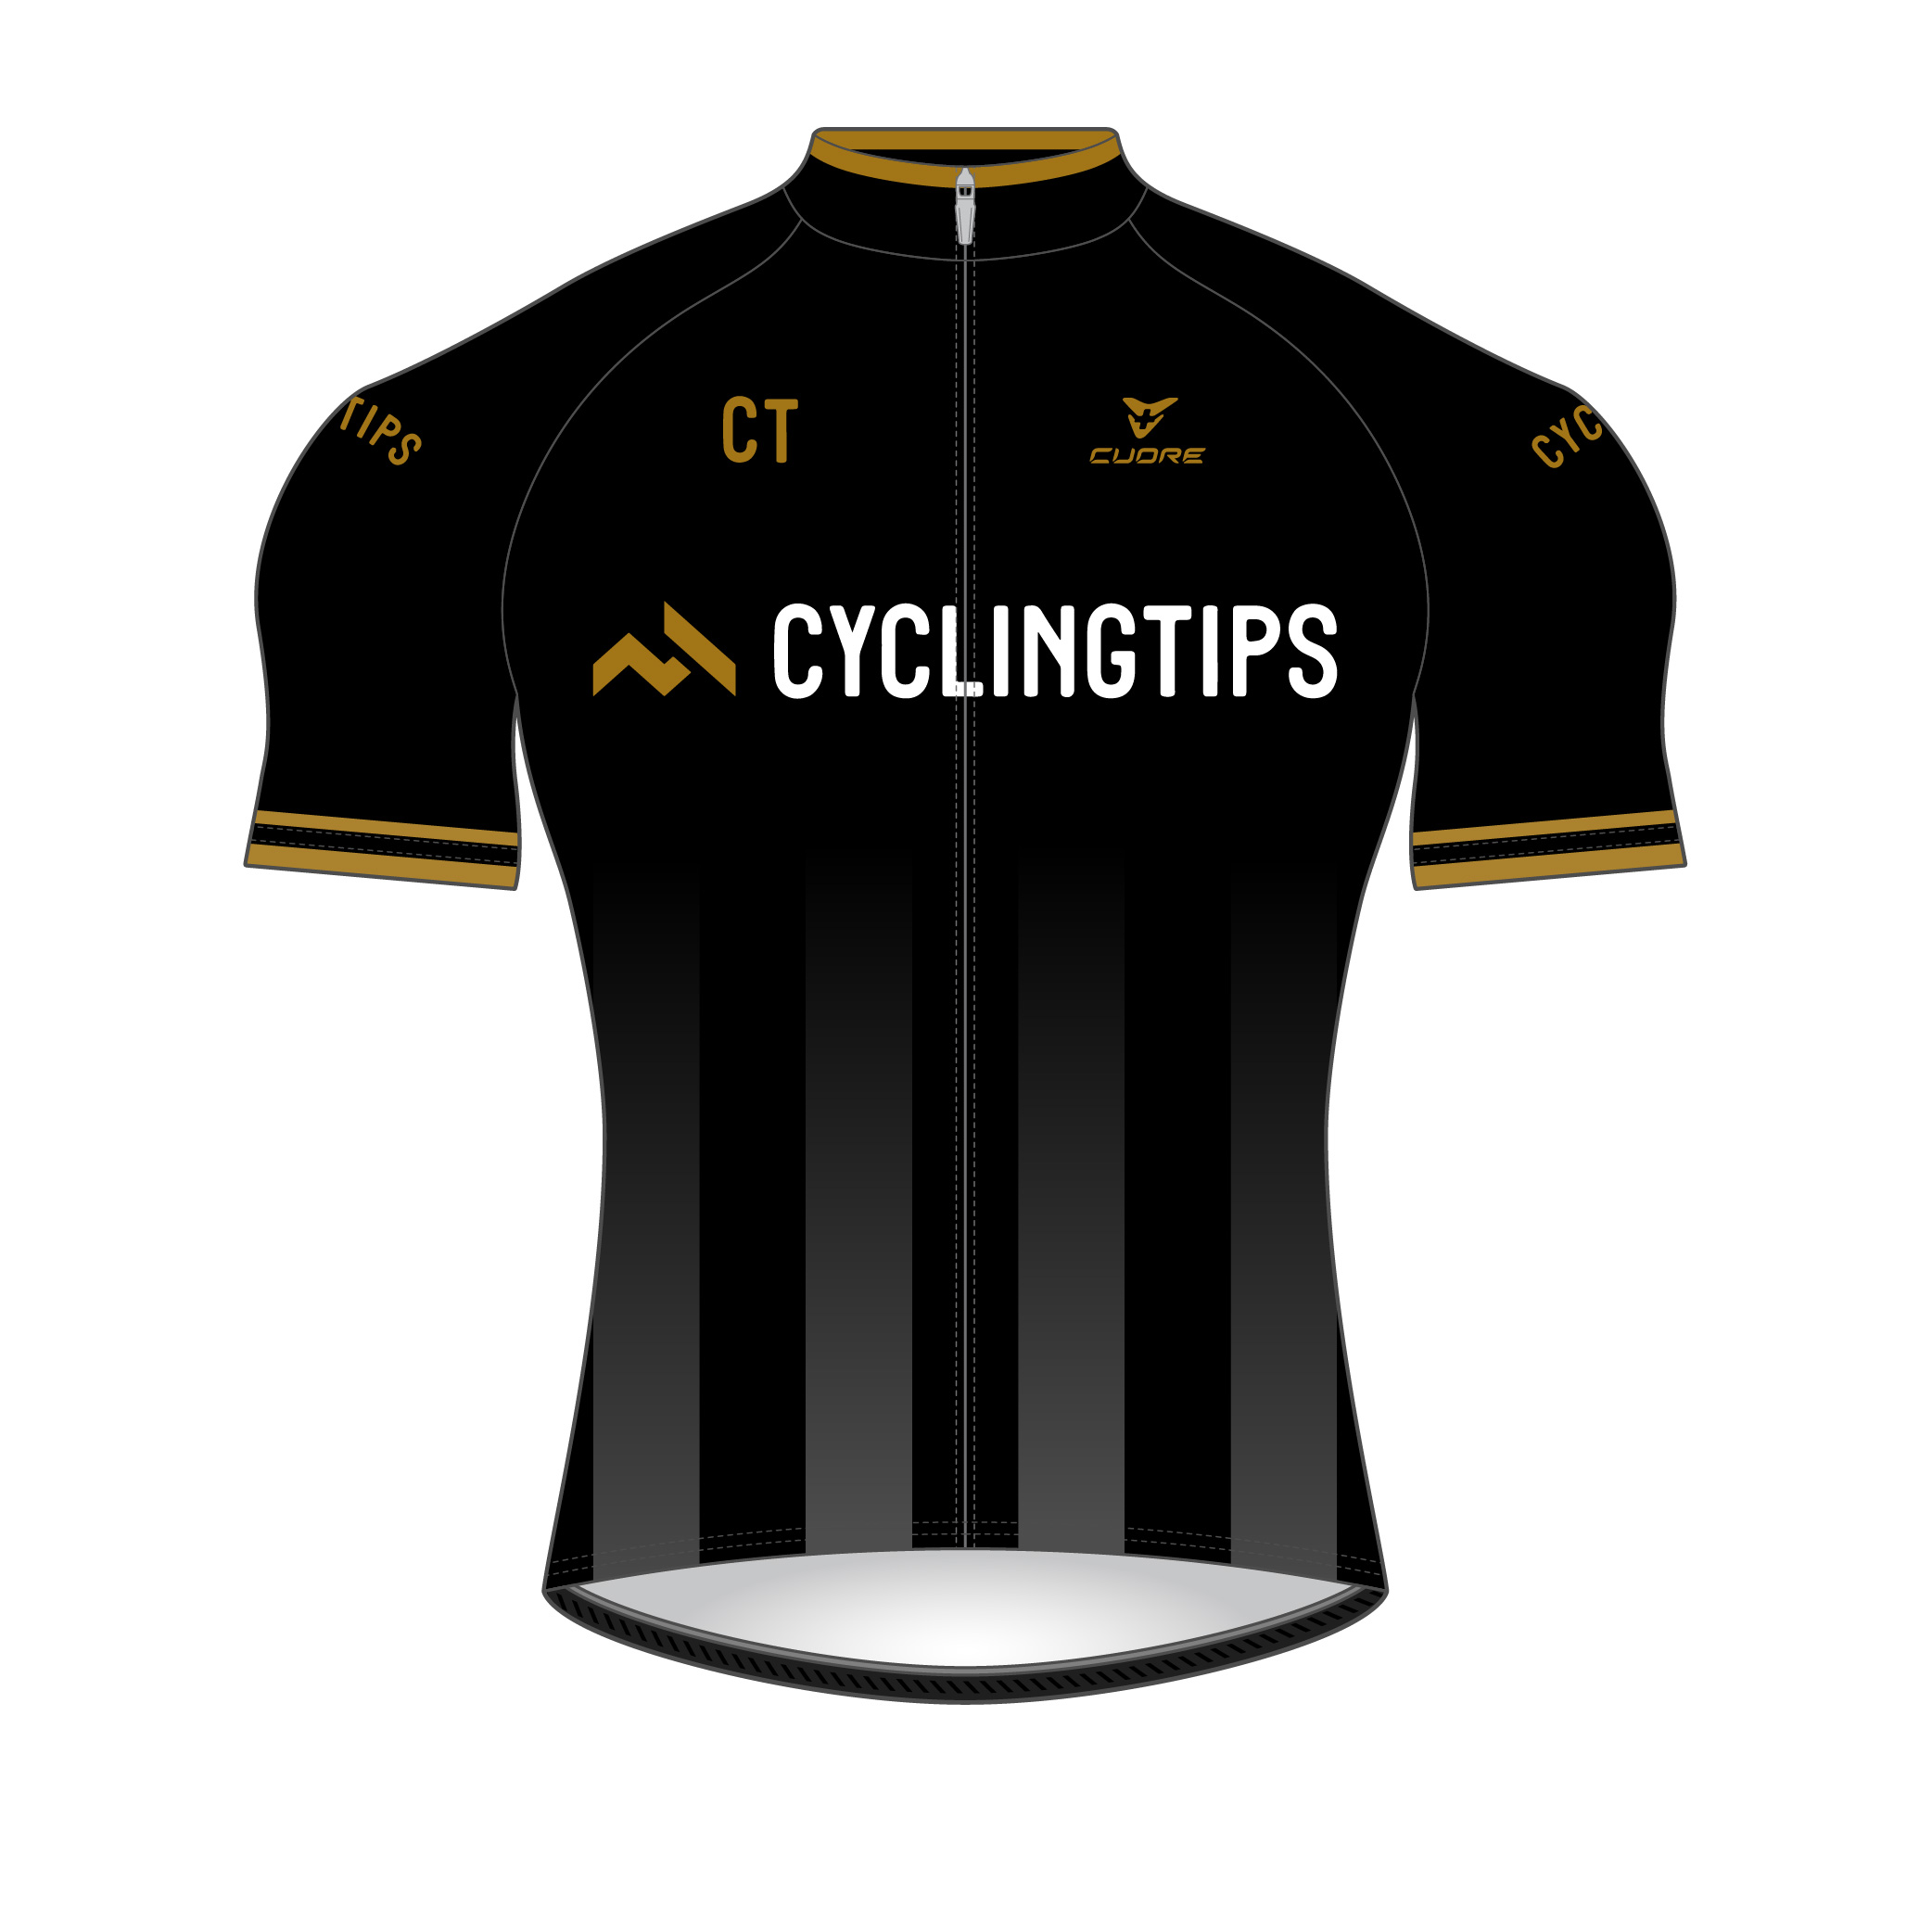 cycling-tips-22-s-51-0010-black-gold-top-front-2.jpg